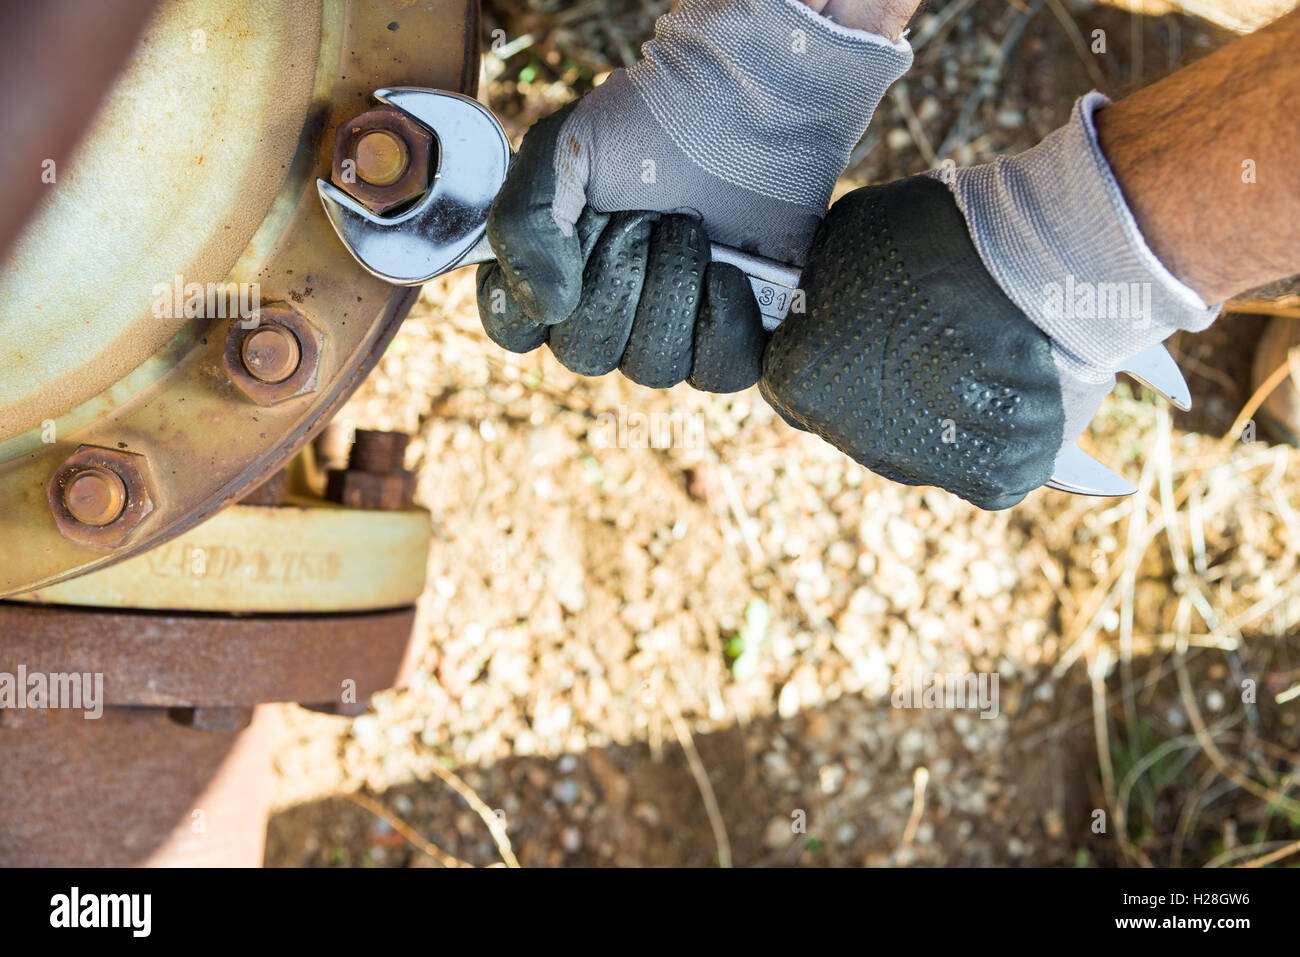 Hands with Work Gloves Holding a Wrench and Tighten very Rusty Bolts Stock Photo